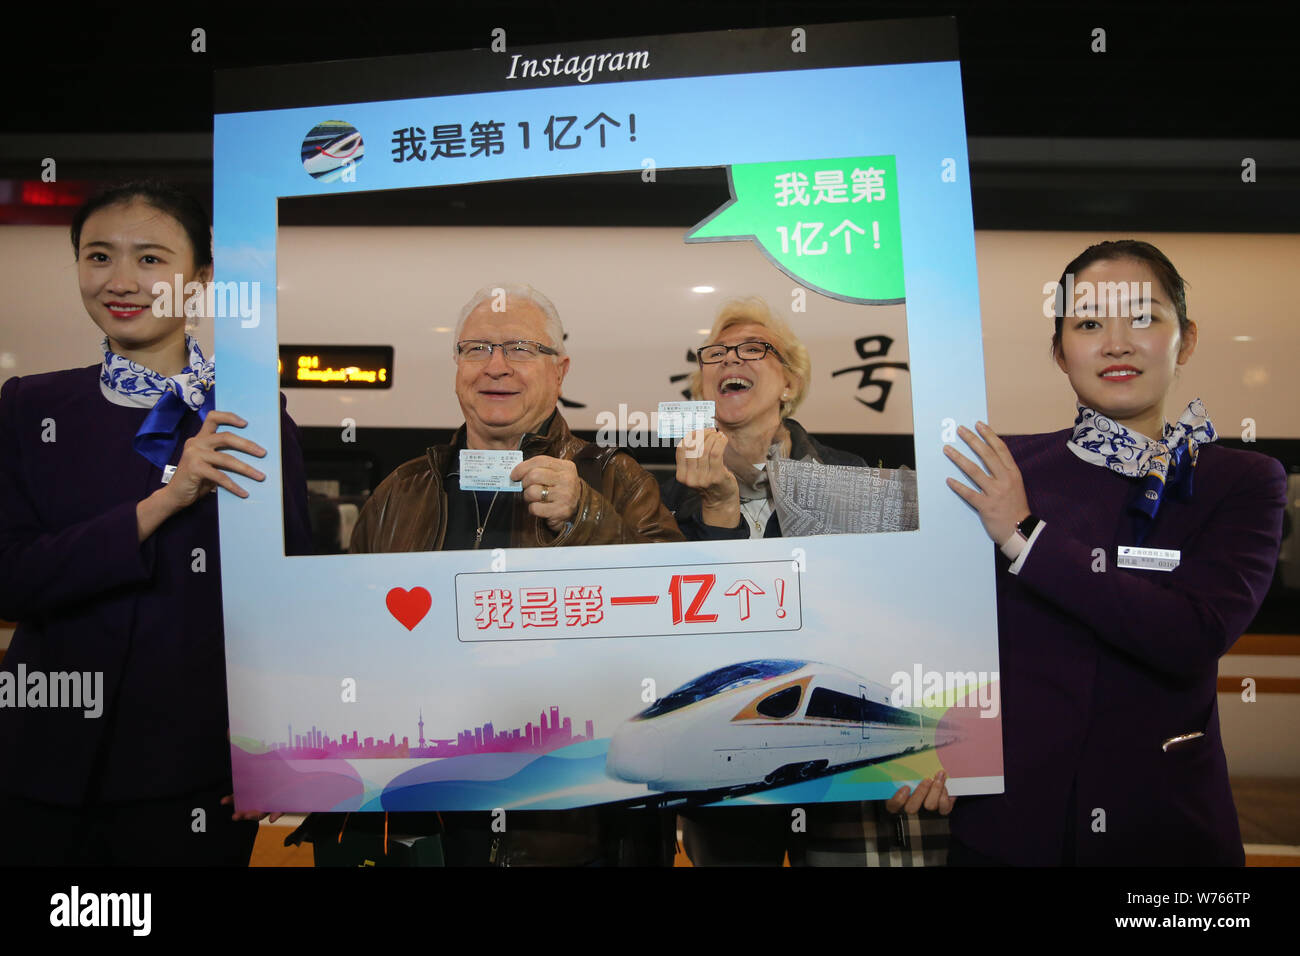 79-year-old American businessman Charles Bingham, who is the city's 100 millionth outbound train passenger this year, poses for photos with his wife a Stock Photo